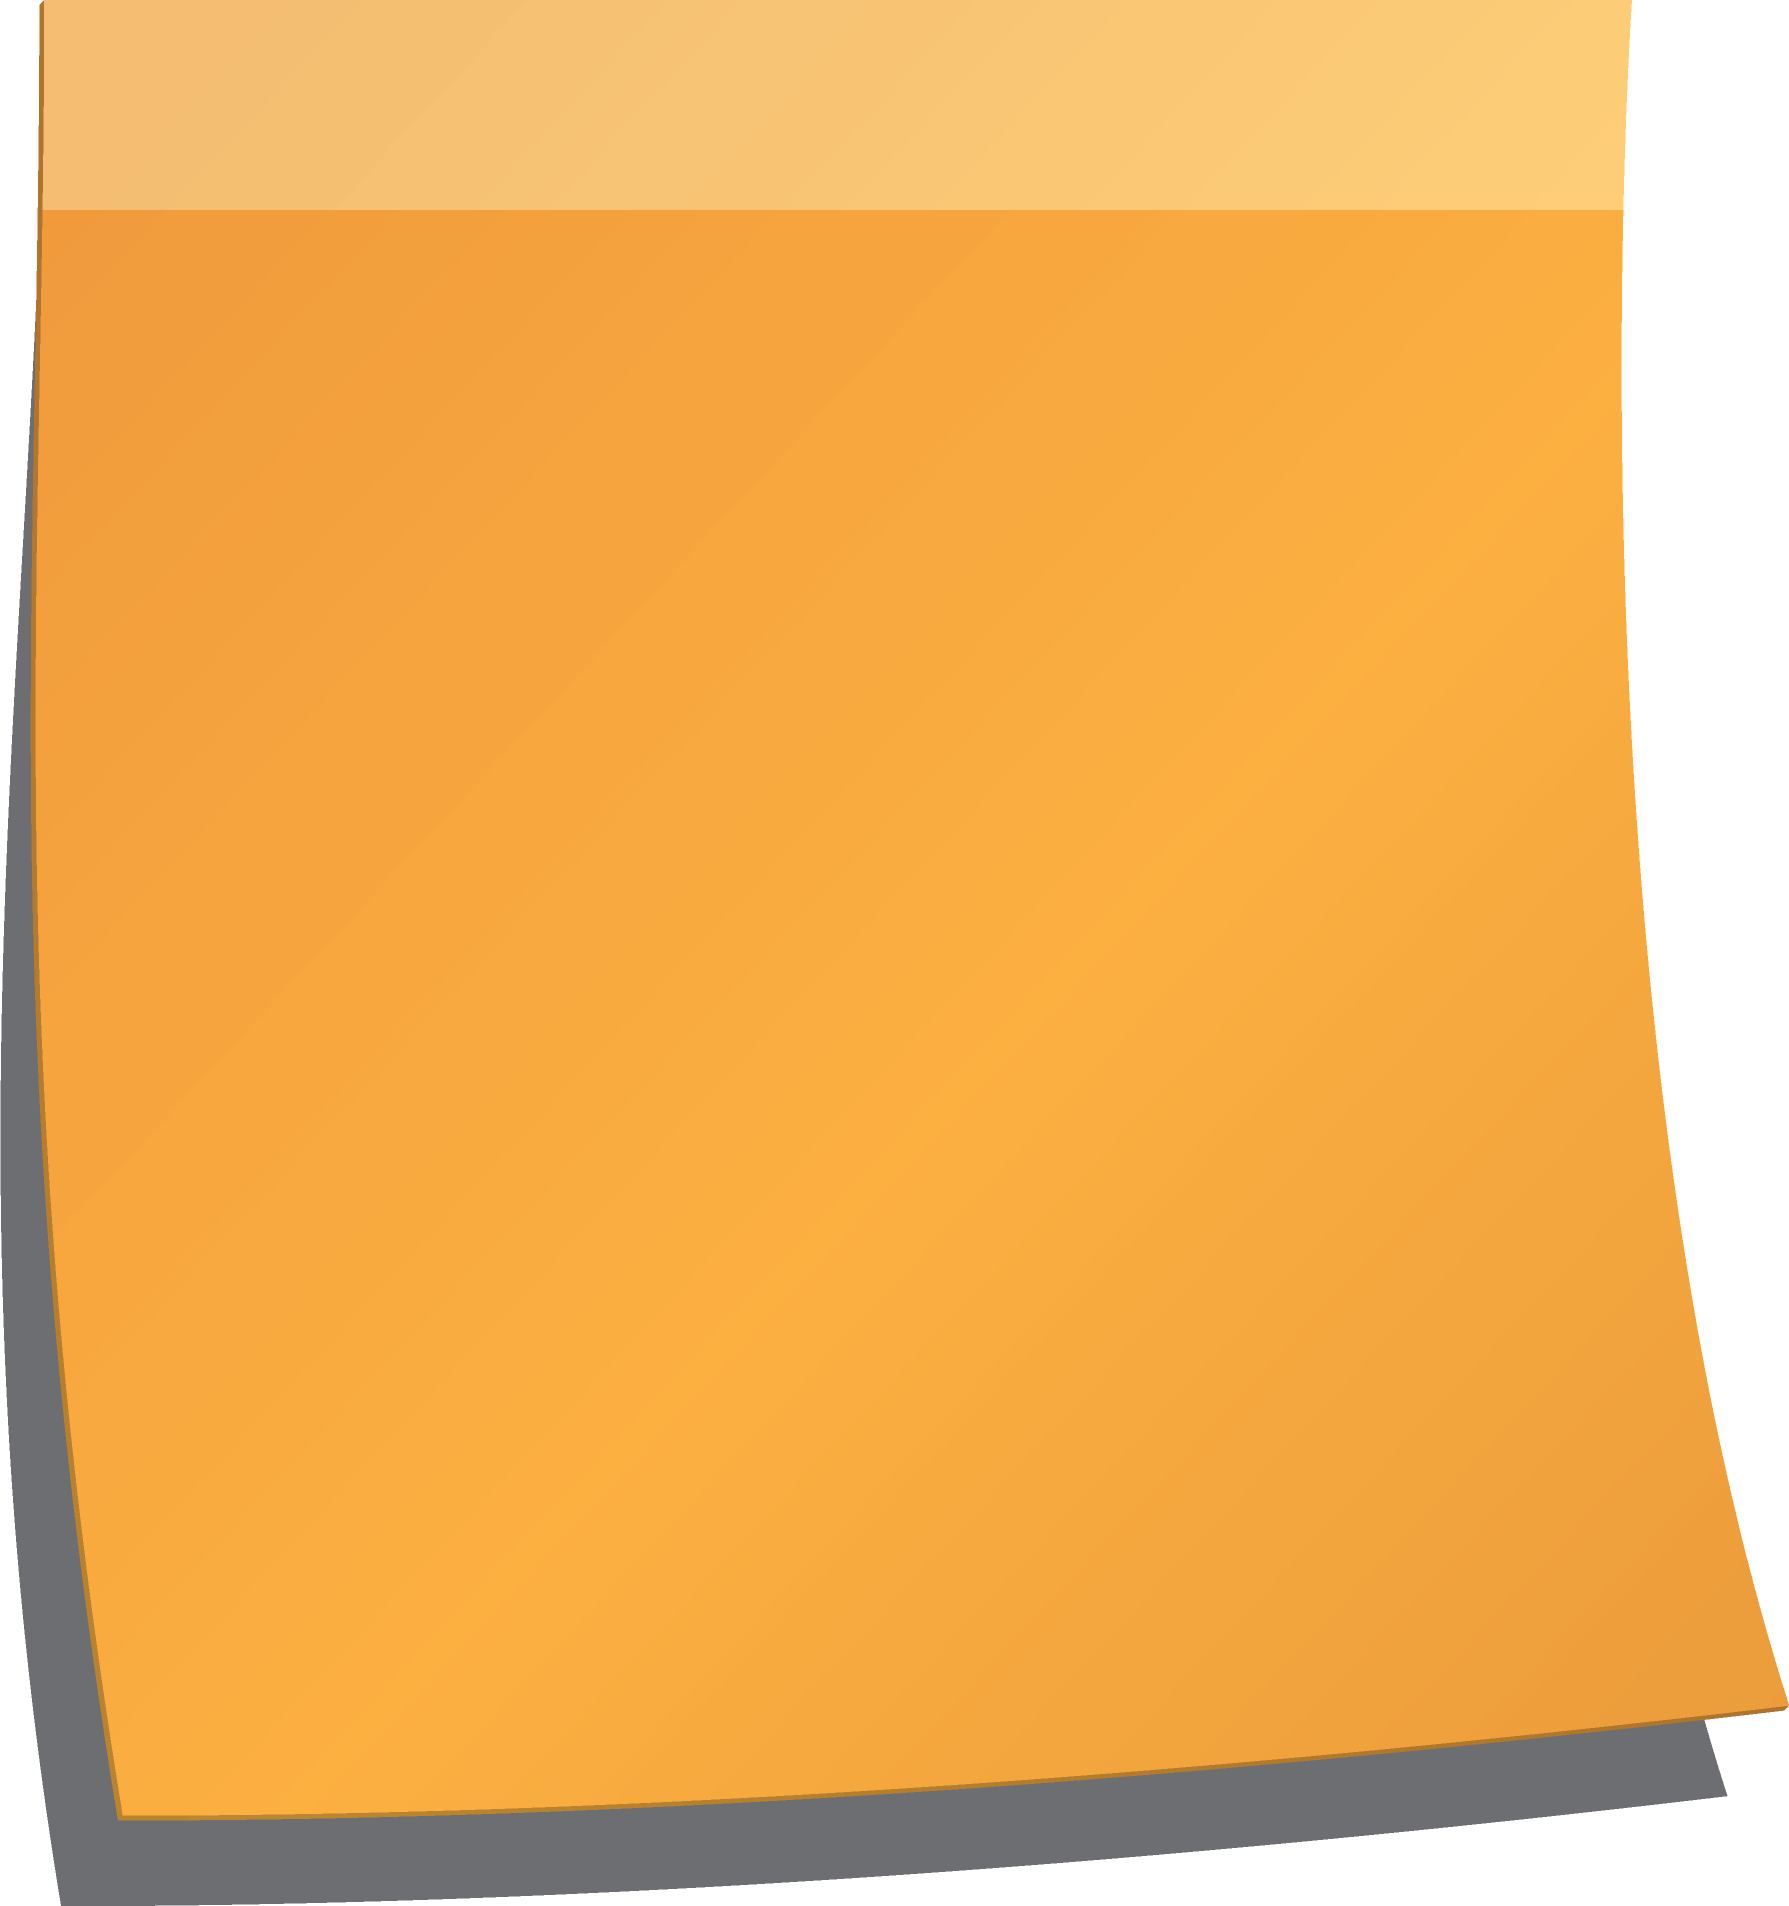 notes clipart notepaper